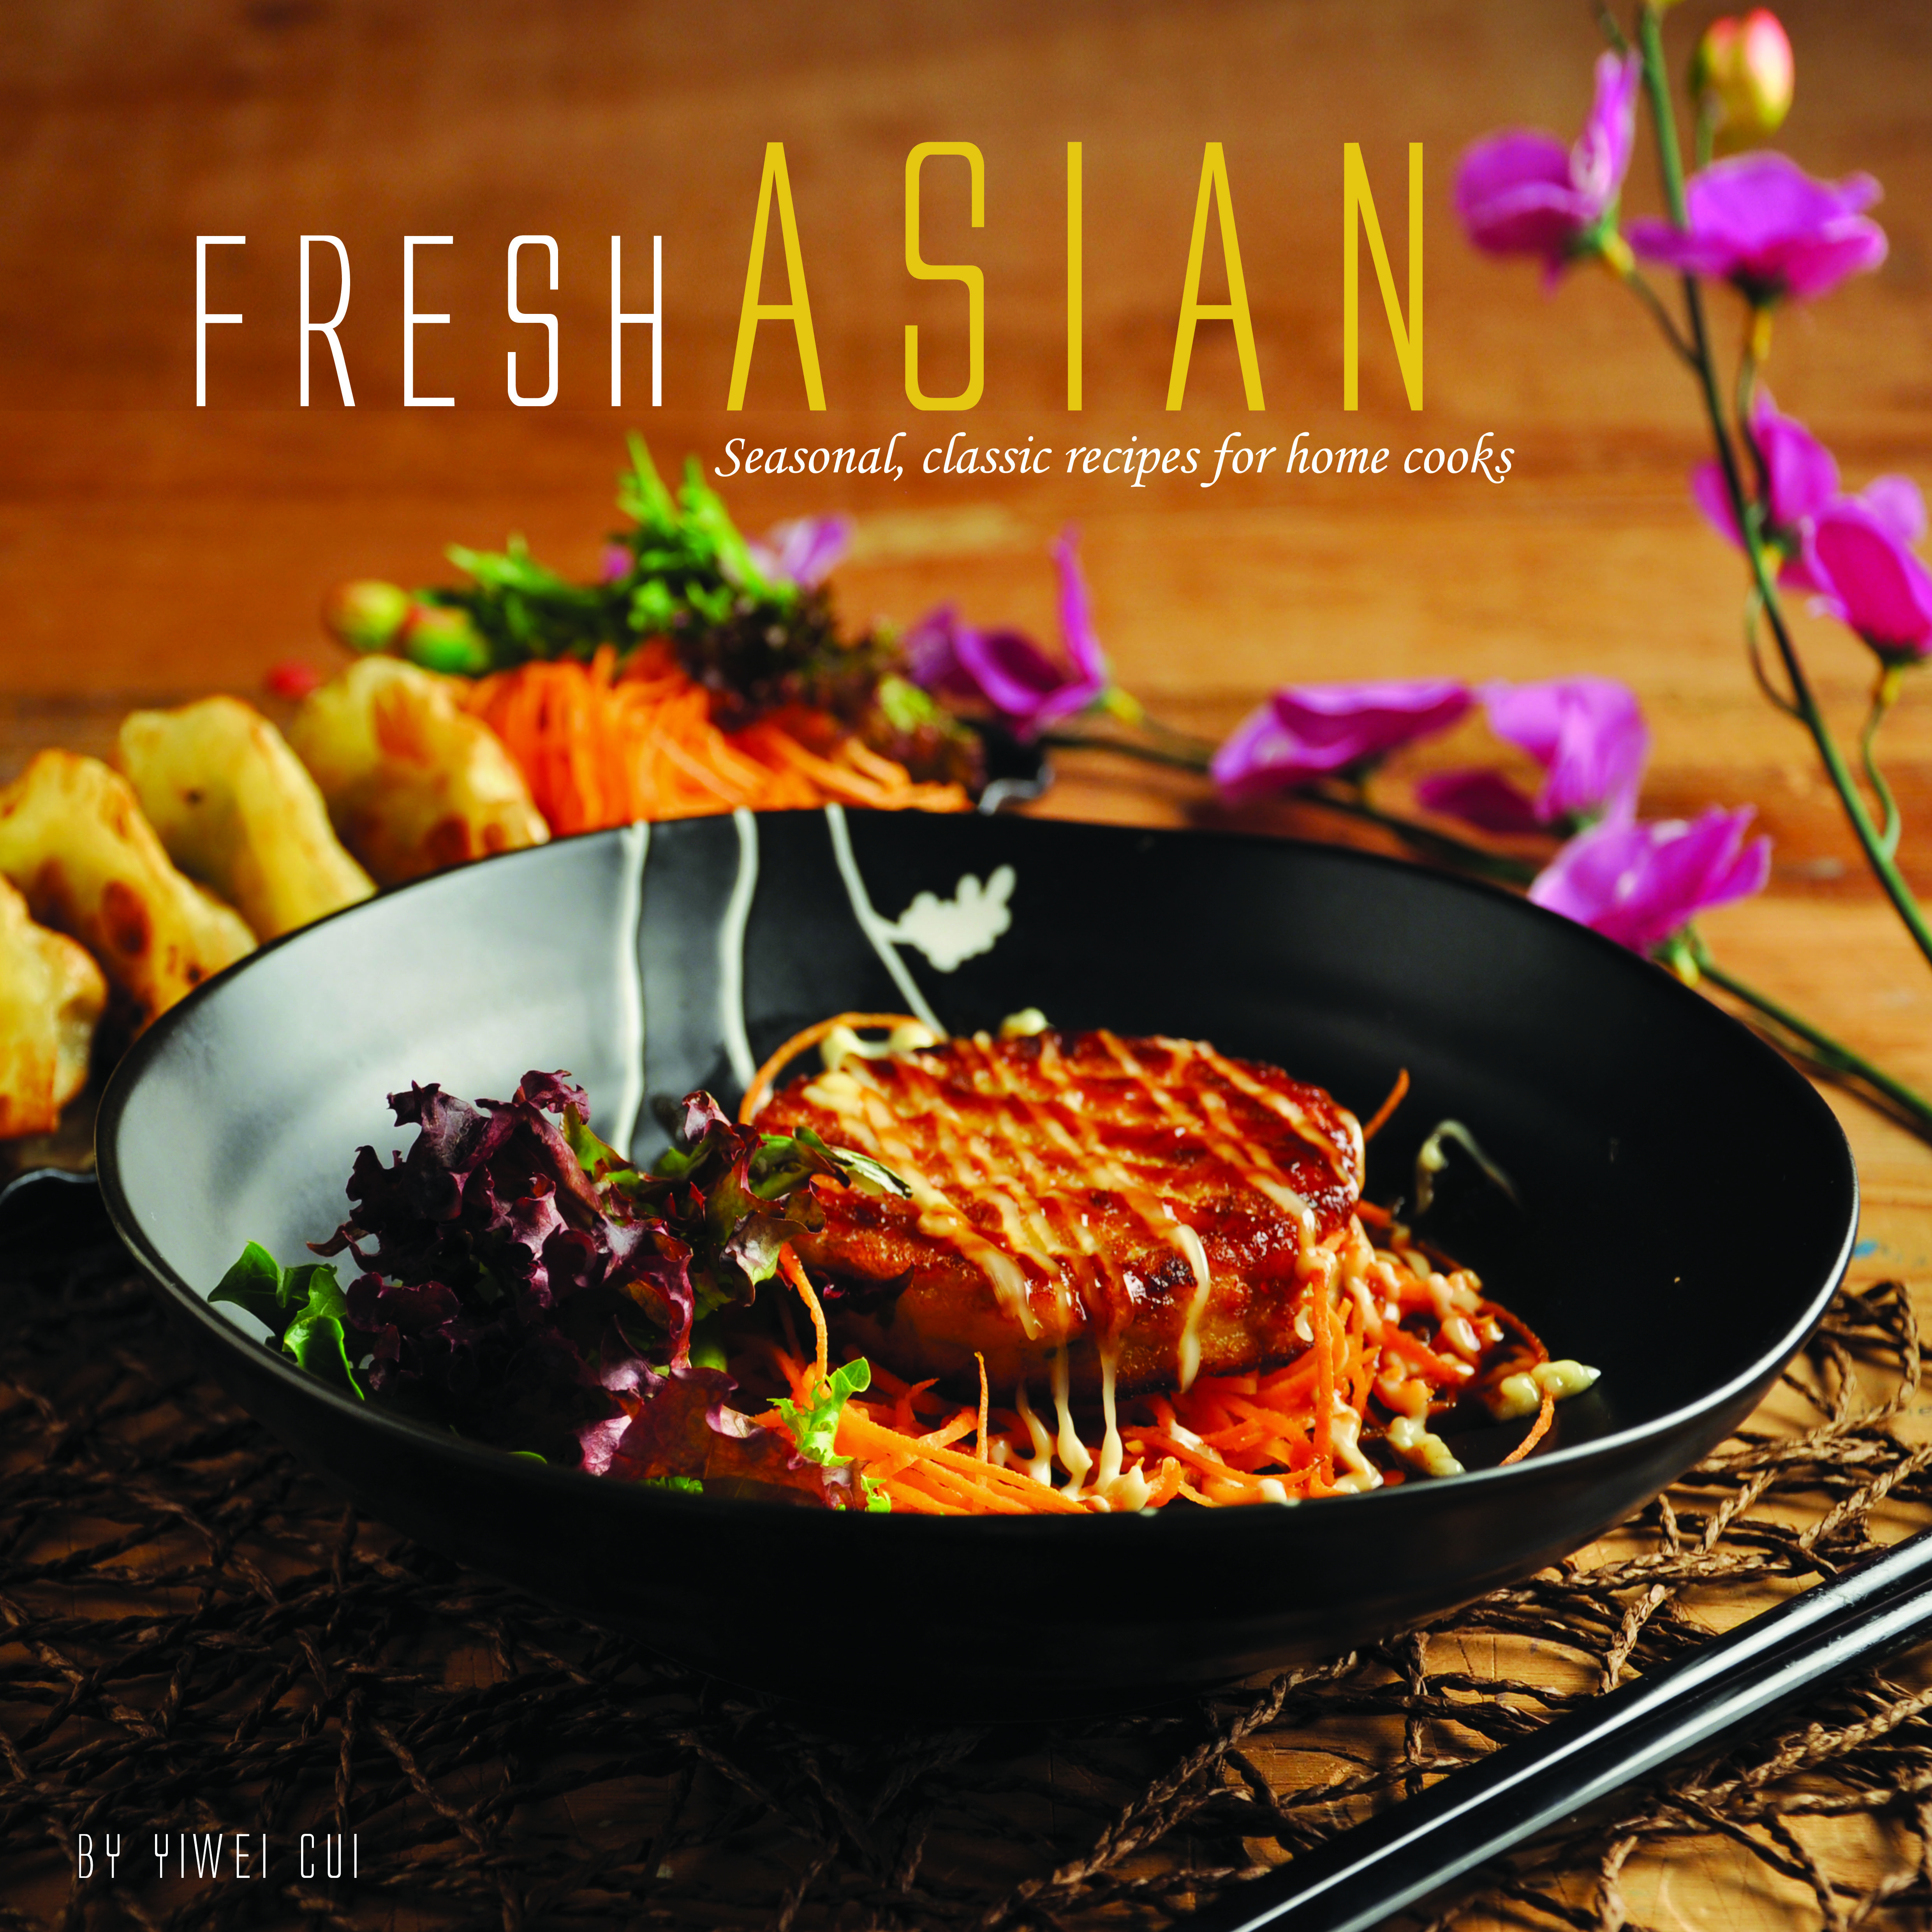 Asian Cook Books 88